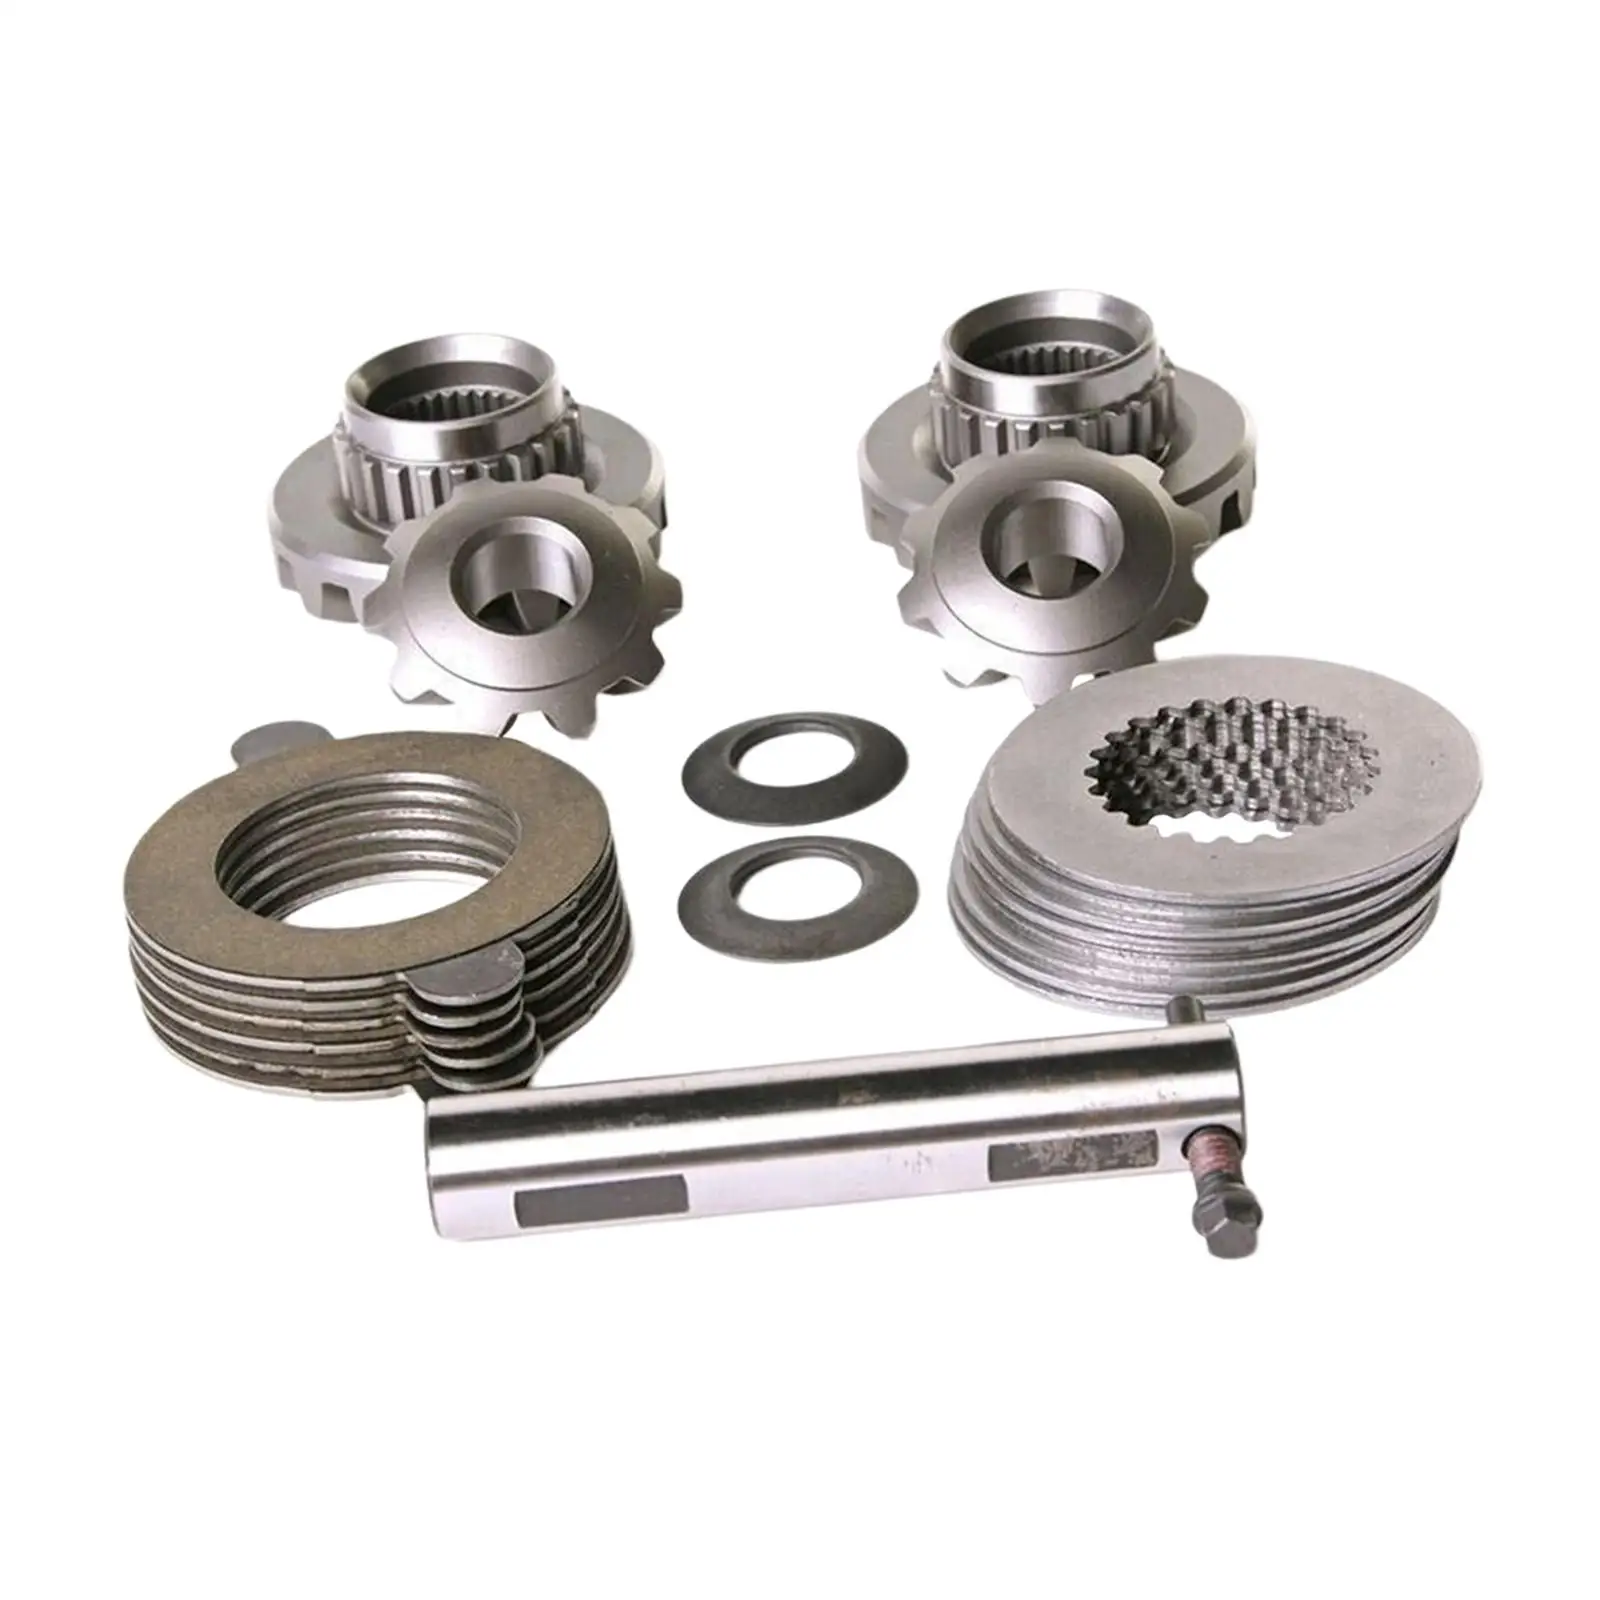 Clutch Pack Gears Kit 31 Spline F8.8cpk for Ford 8.8